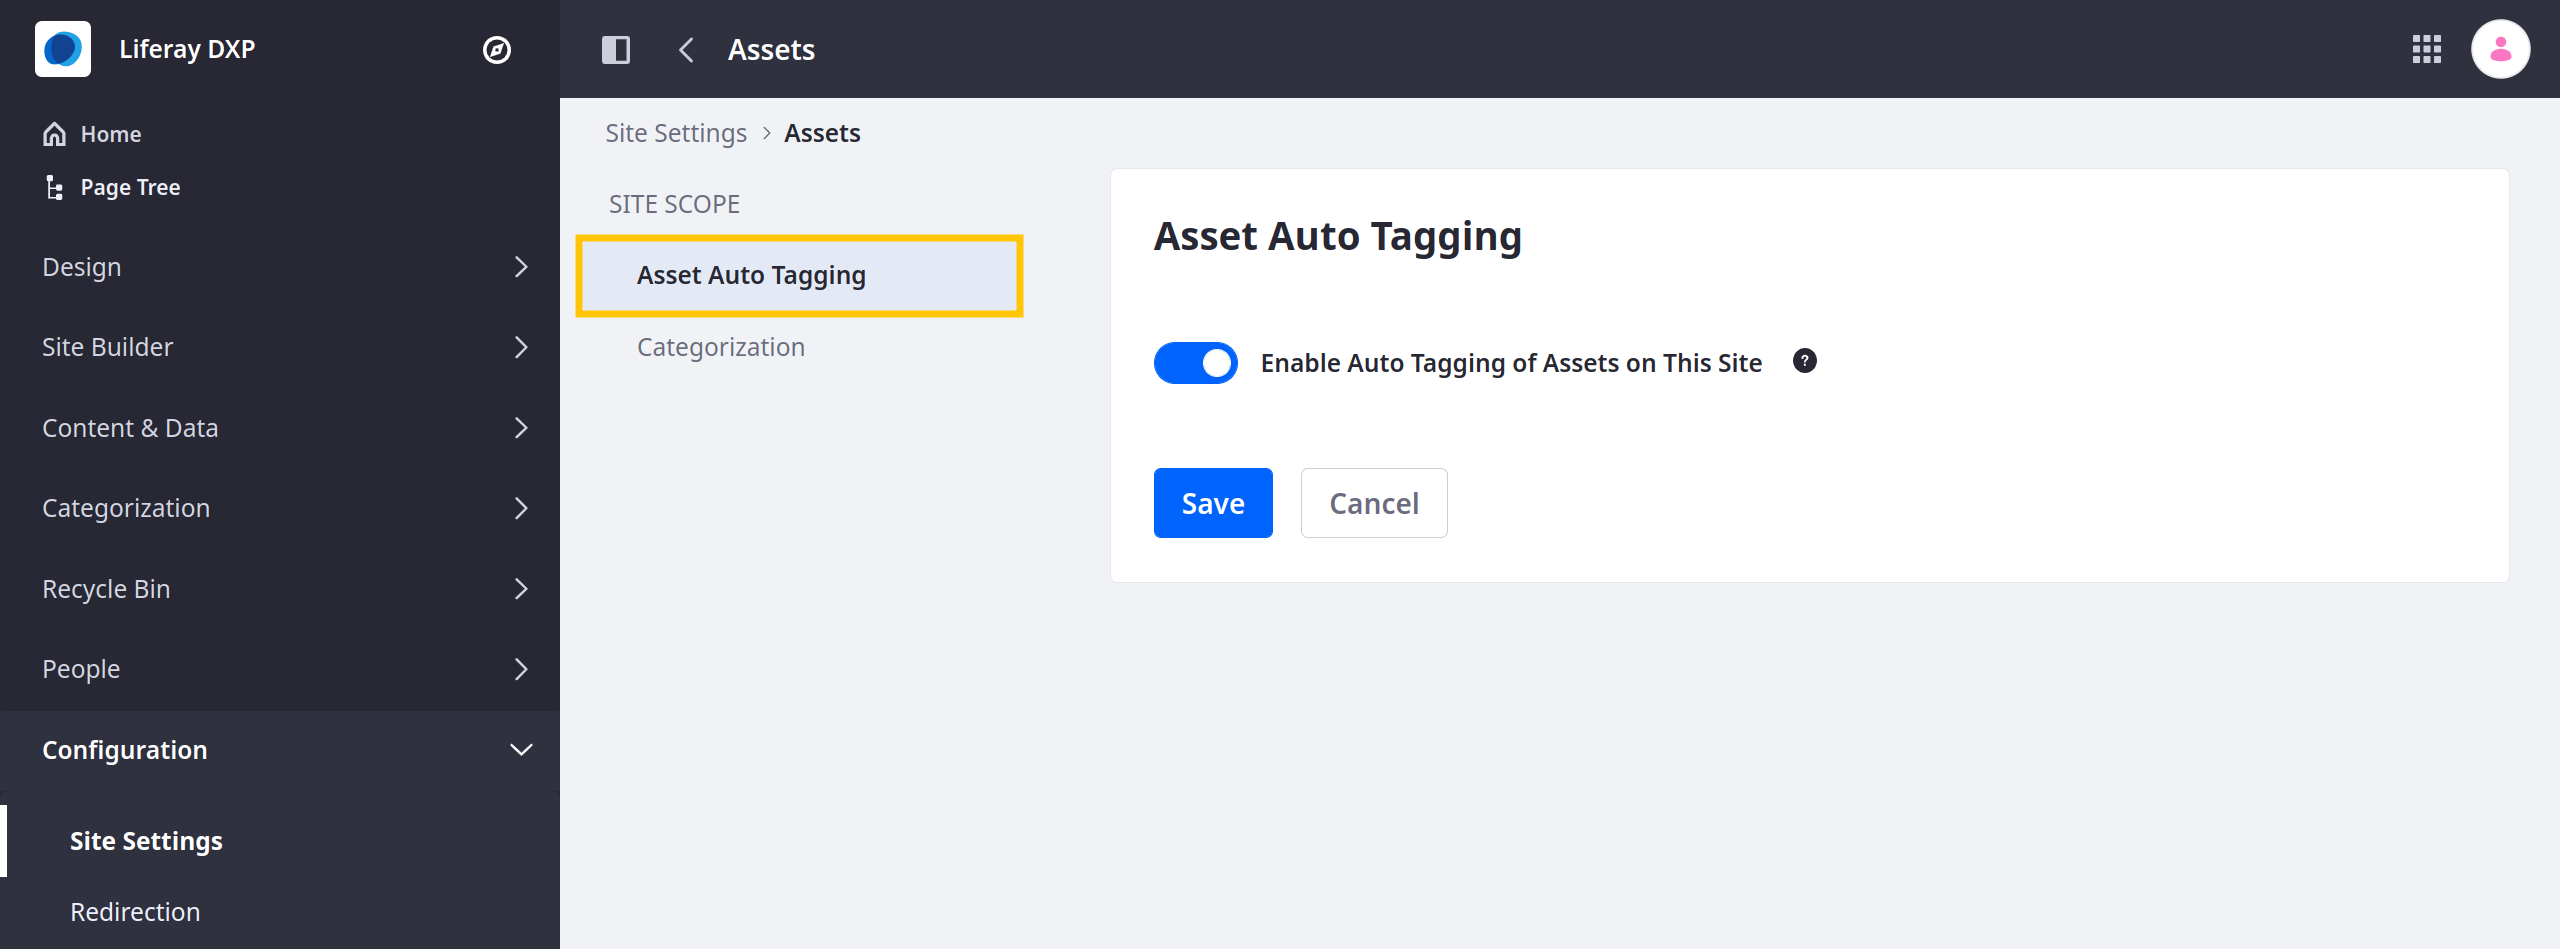 Go to Assets under Content and Data and click the Asset Auto Tagging tab.